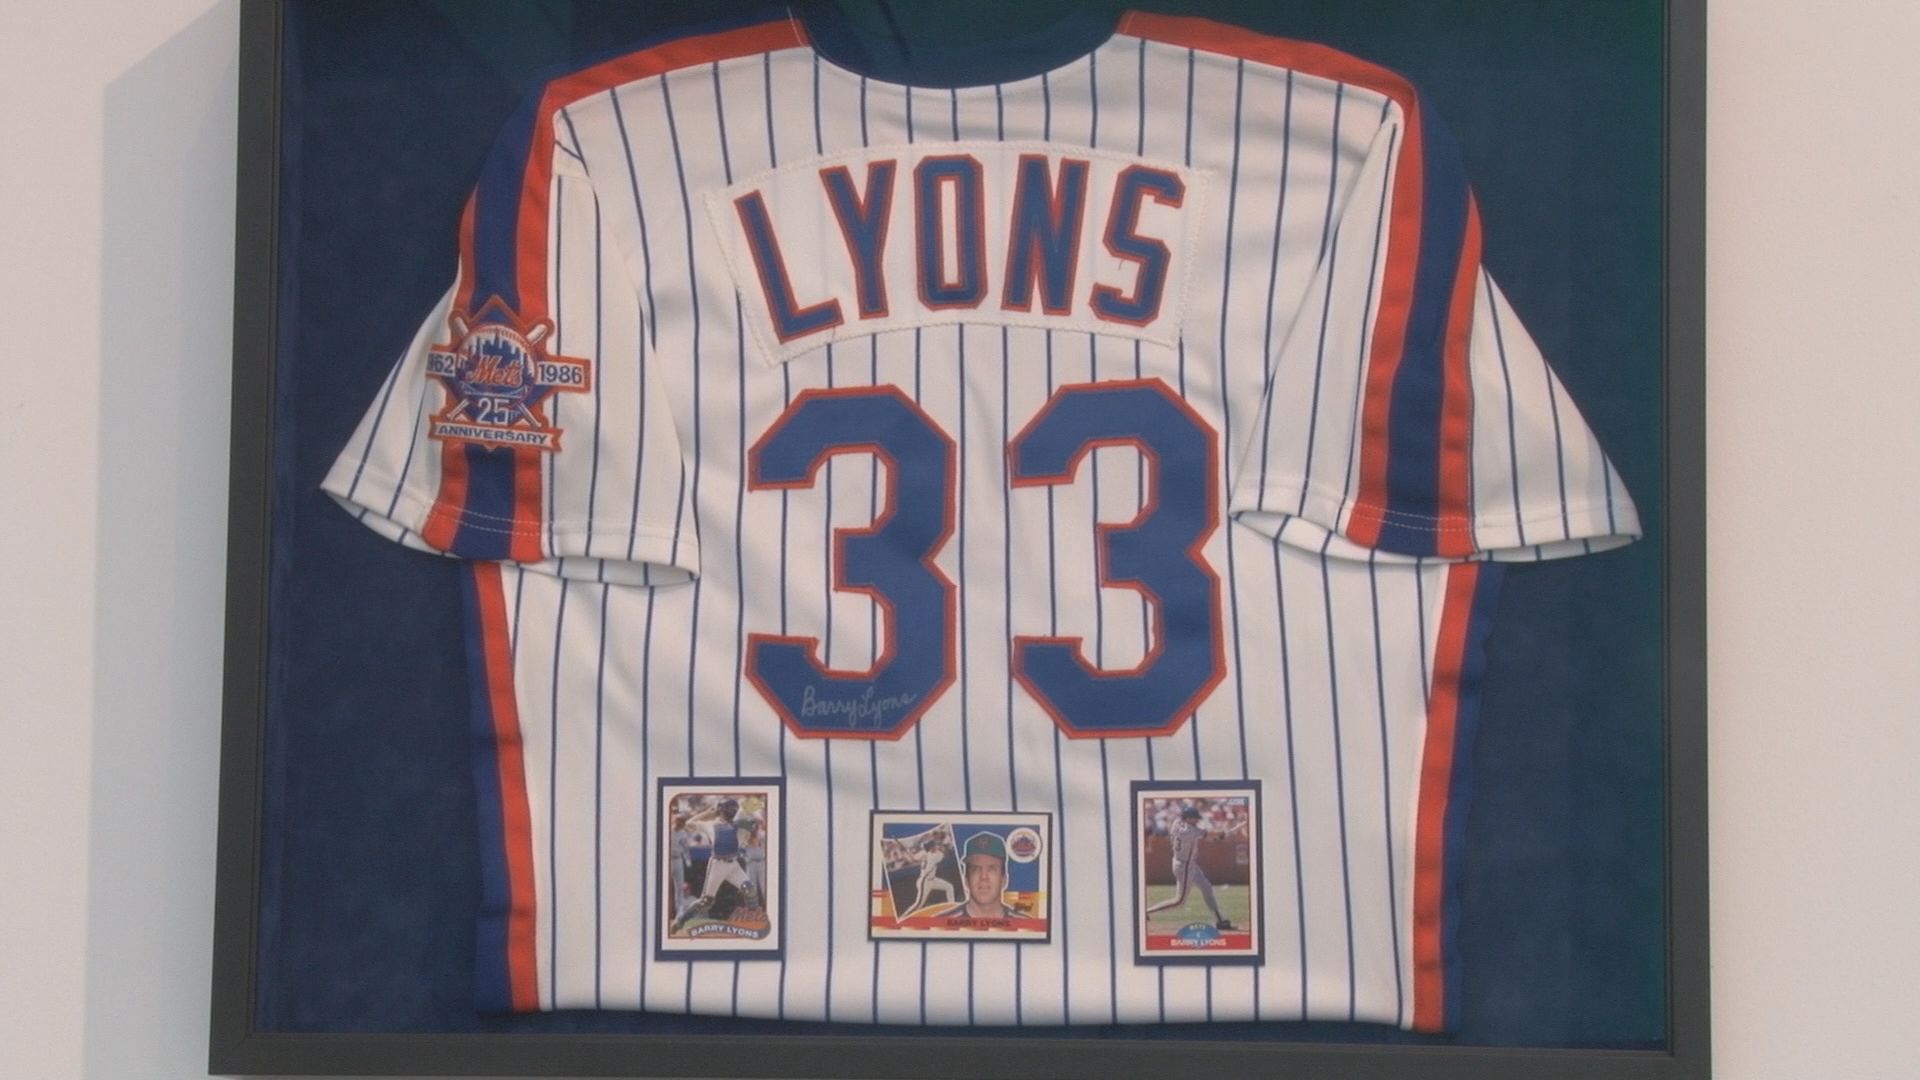 Lot Detail - 1986 Barry Lyons Game Used and Signed New York Mets